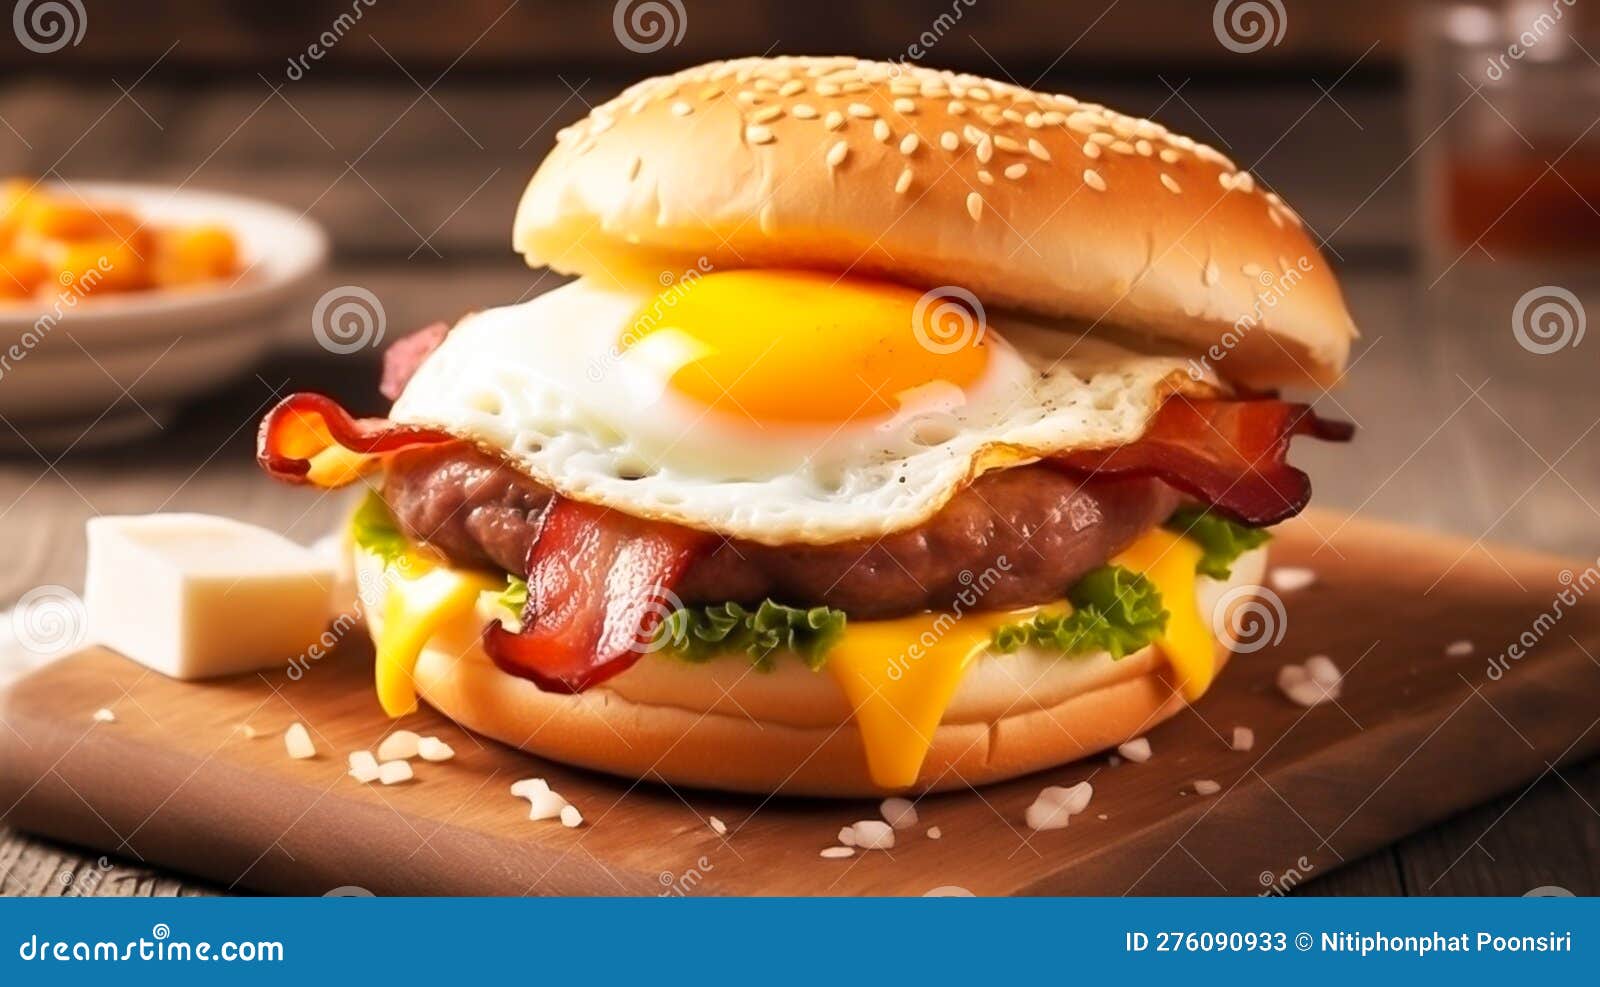 Breakfast, Bacon and Eggs in Pan, Product and Cheese Burger with Fresh ...